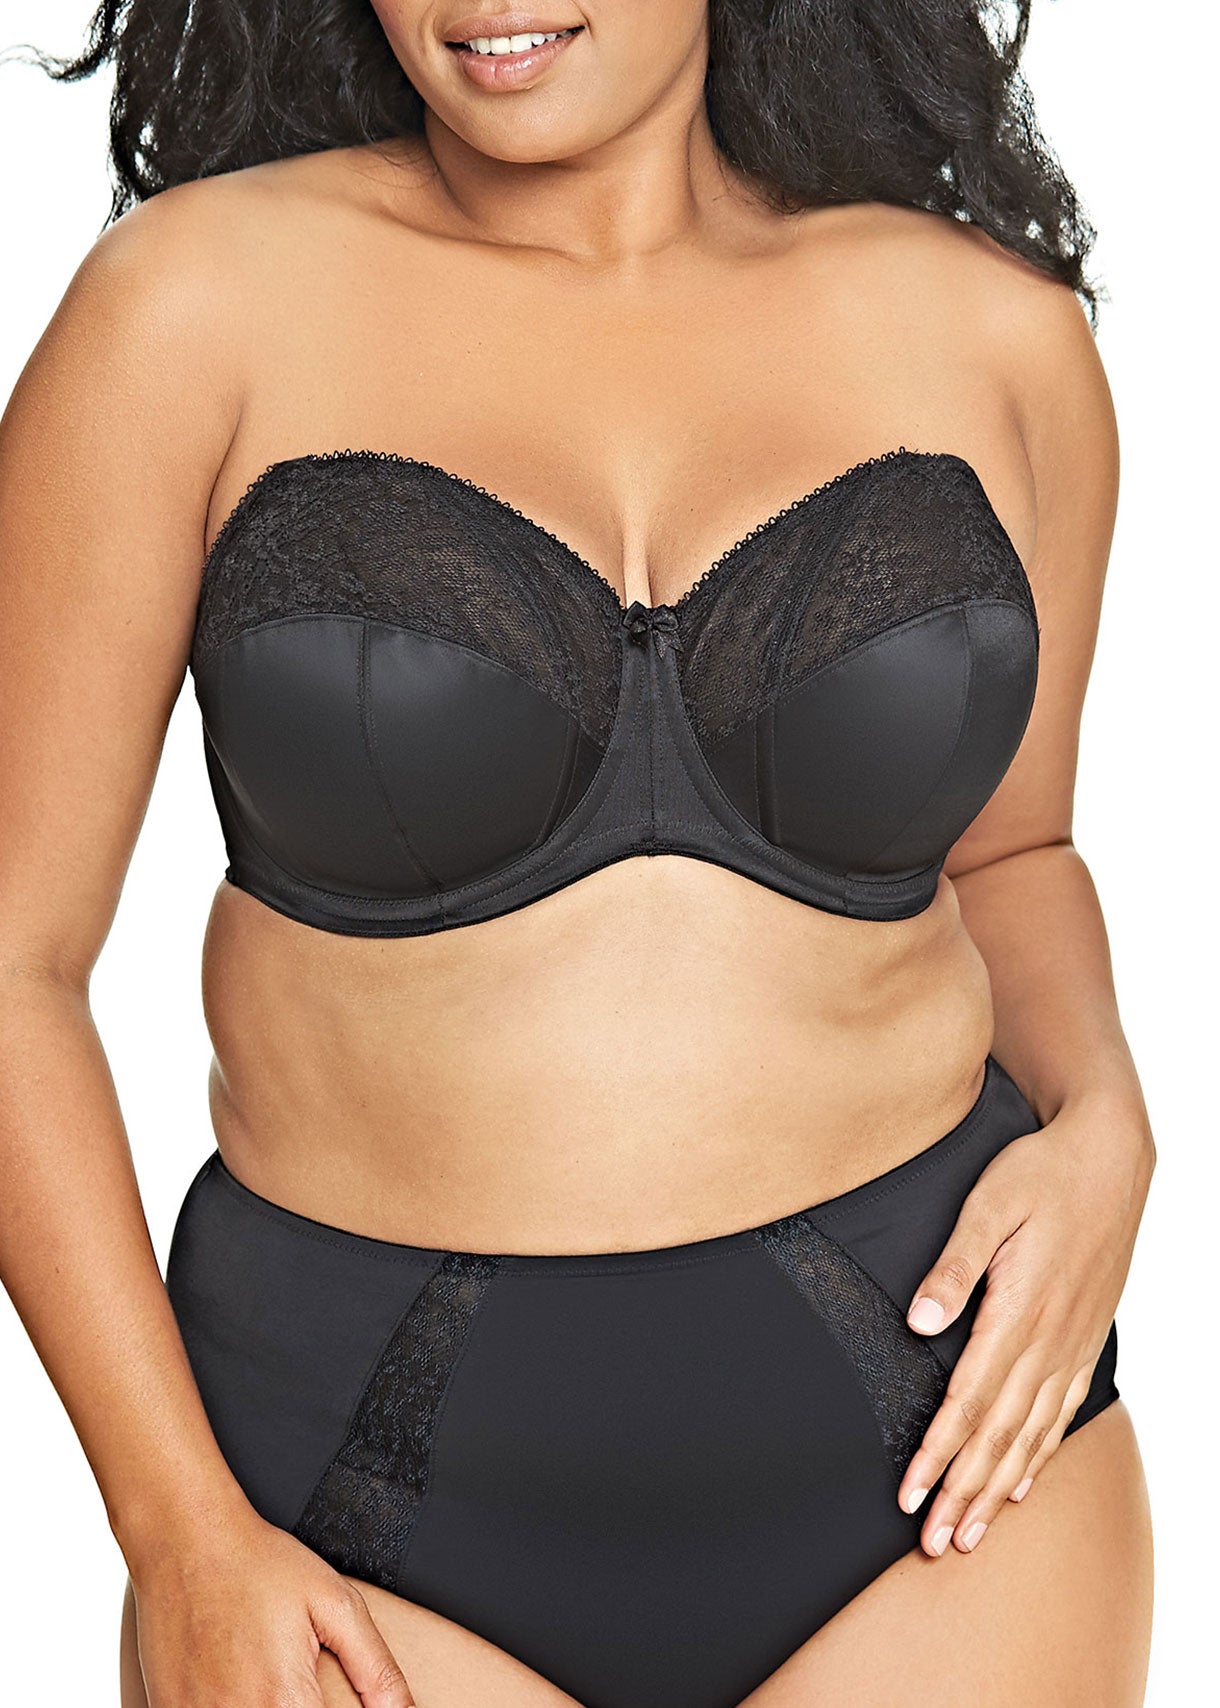 Rosalyn Black Lace Bra - 32-40 bands and D-H cups (UK size)